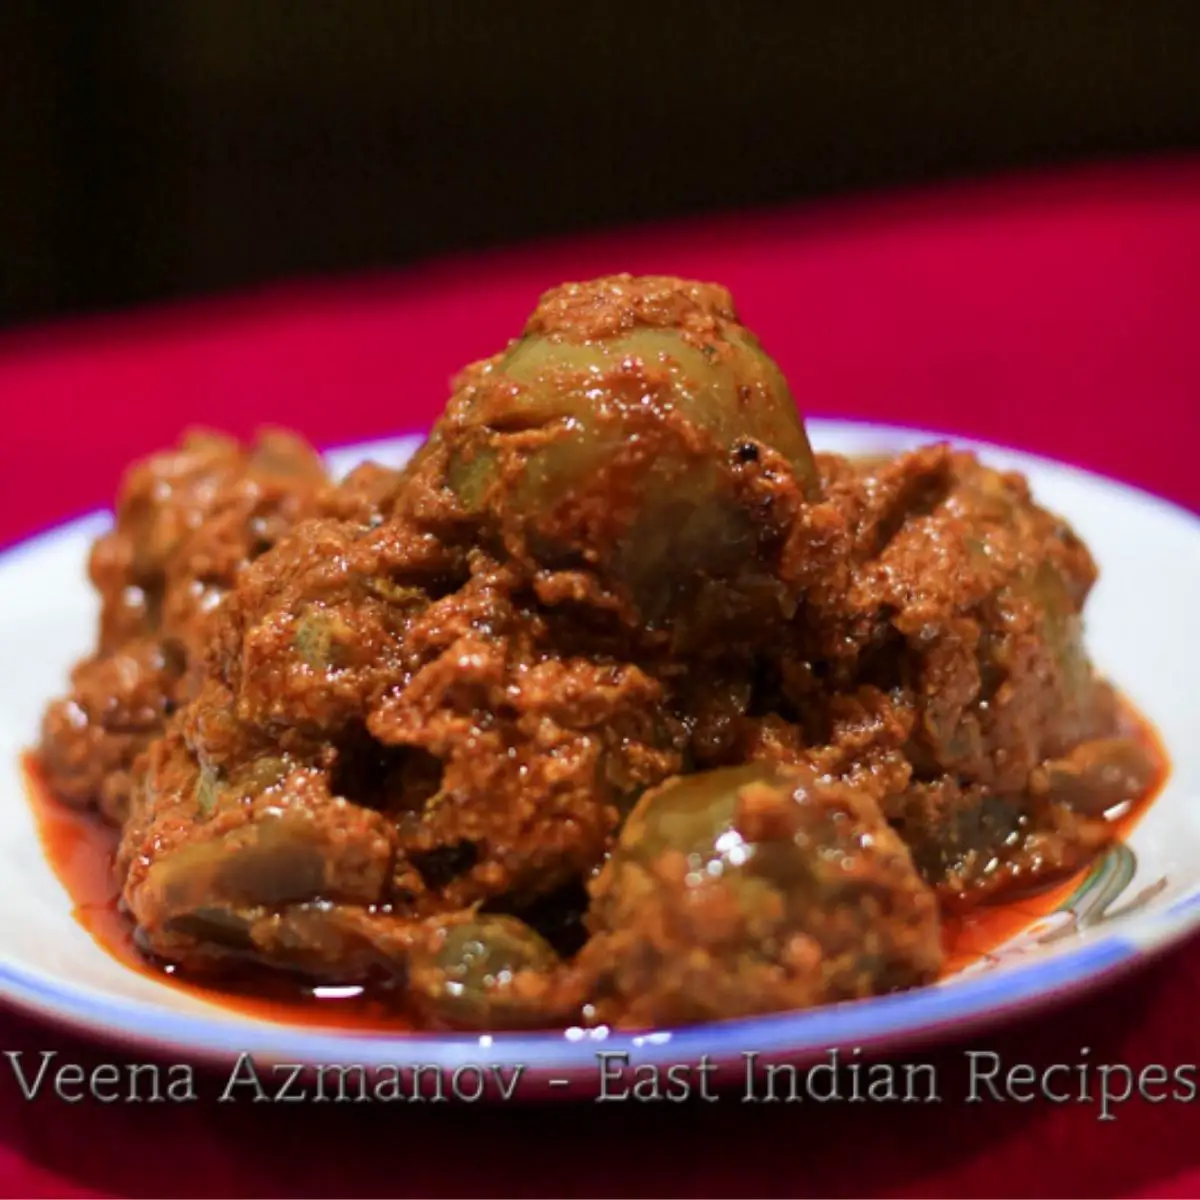 A plate with brinjal pickle